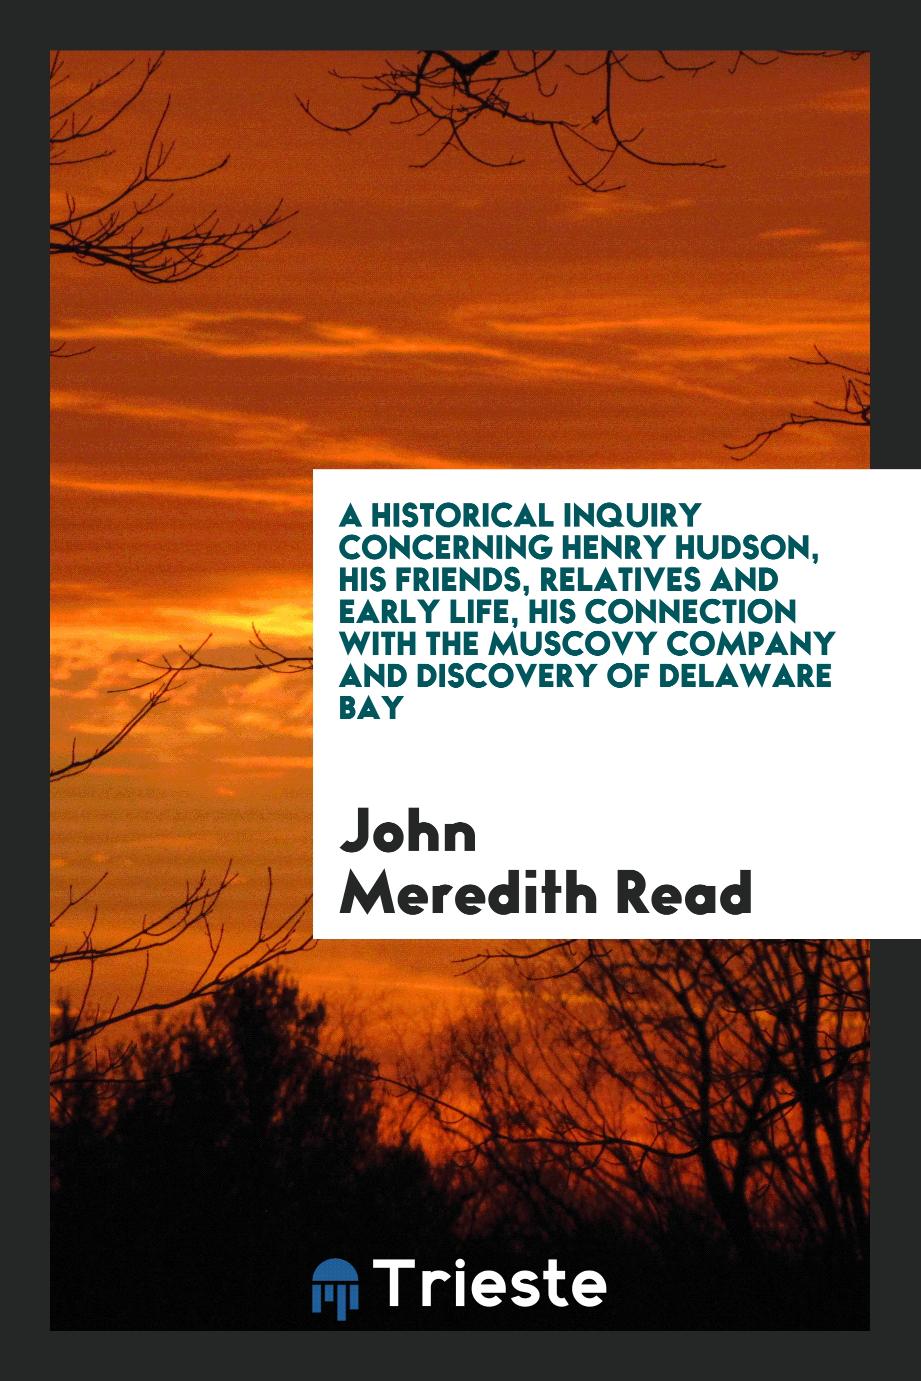 A historical inquiry concerning Henry Hudson, his friends, relatives and early life, his connection with the Muscovy company and discovery of Delaware Bay